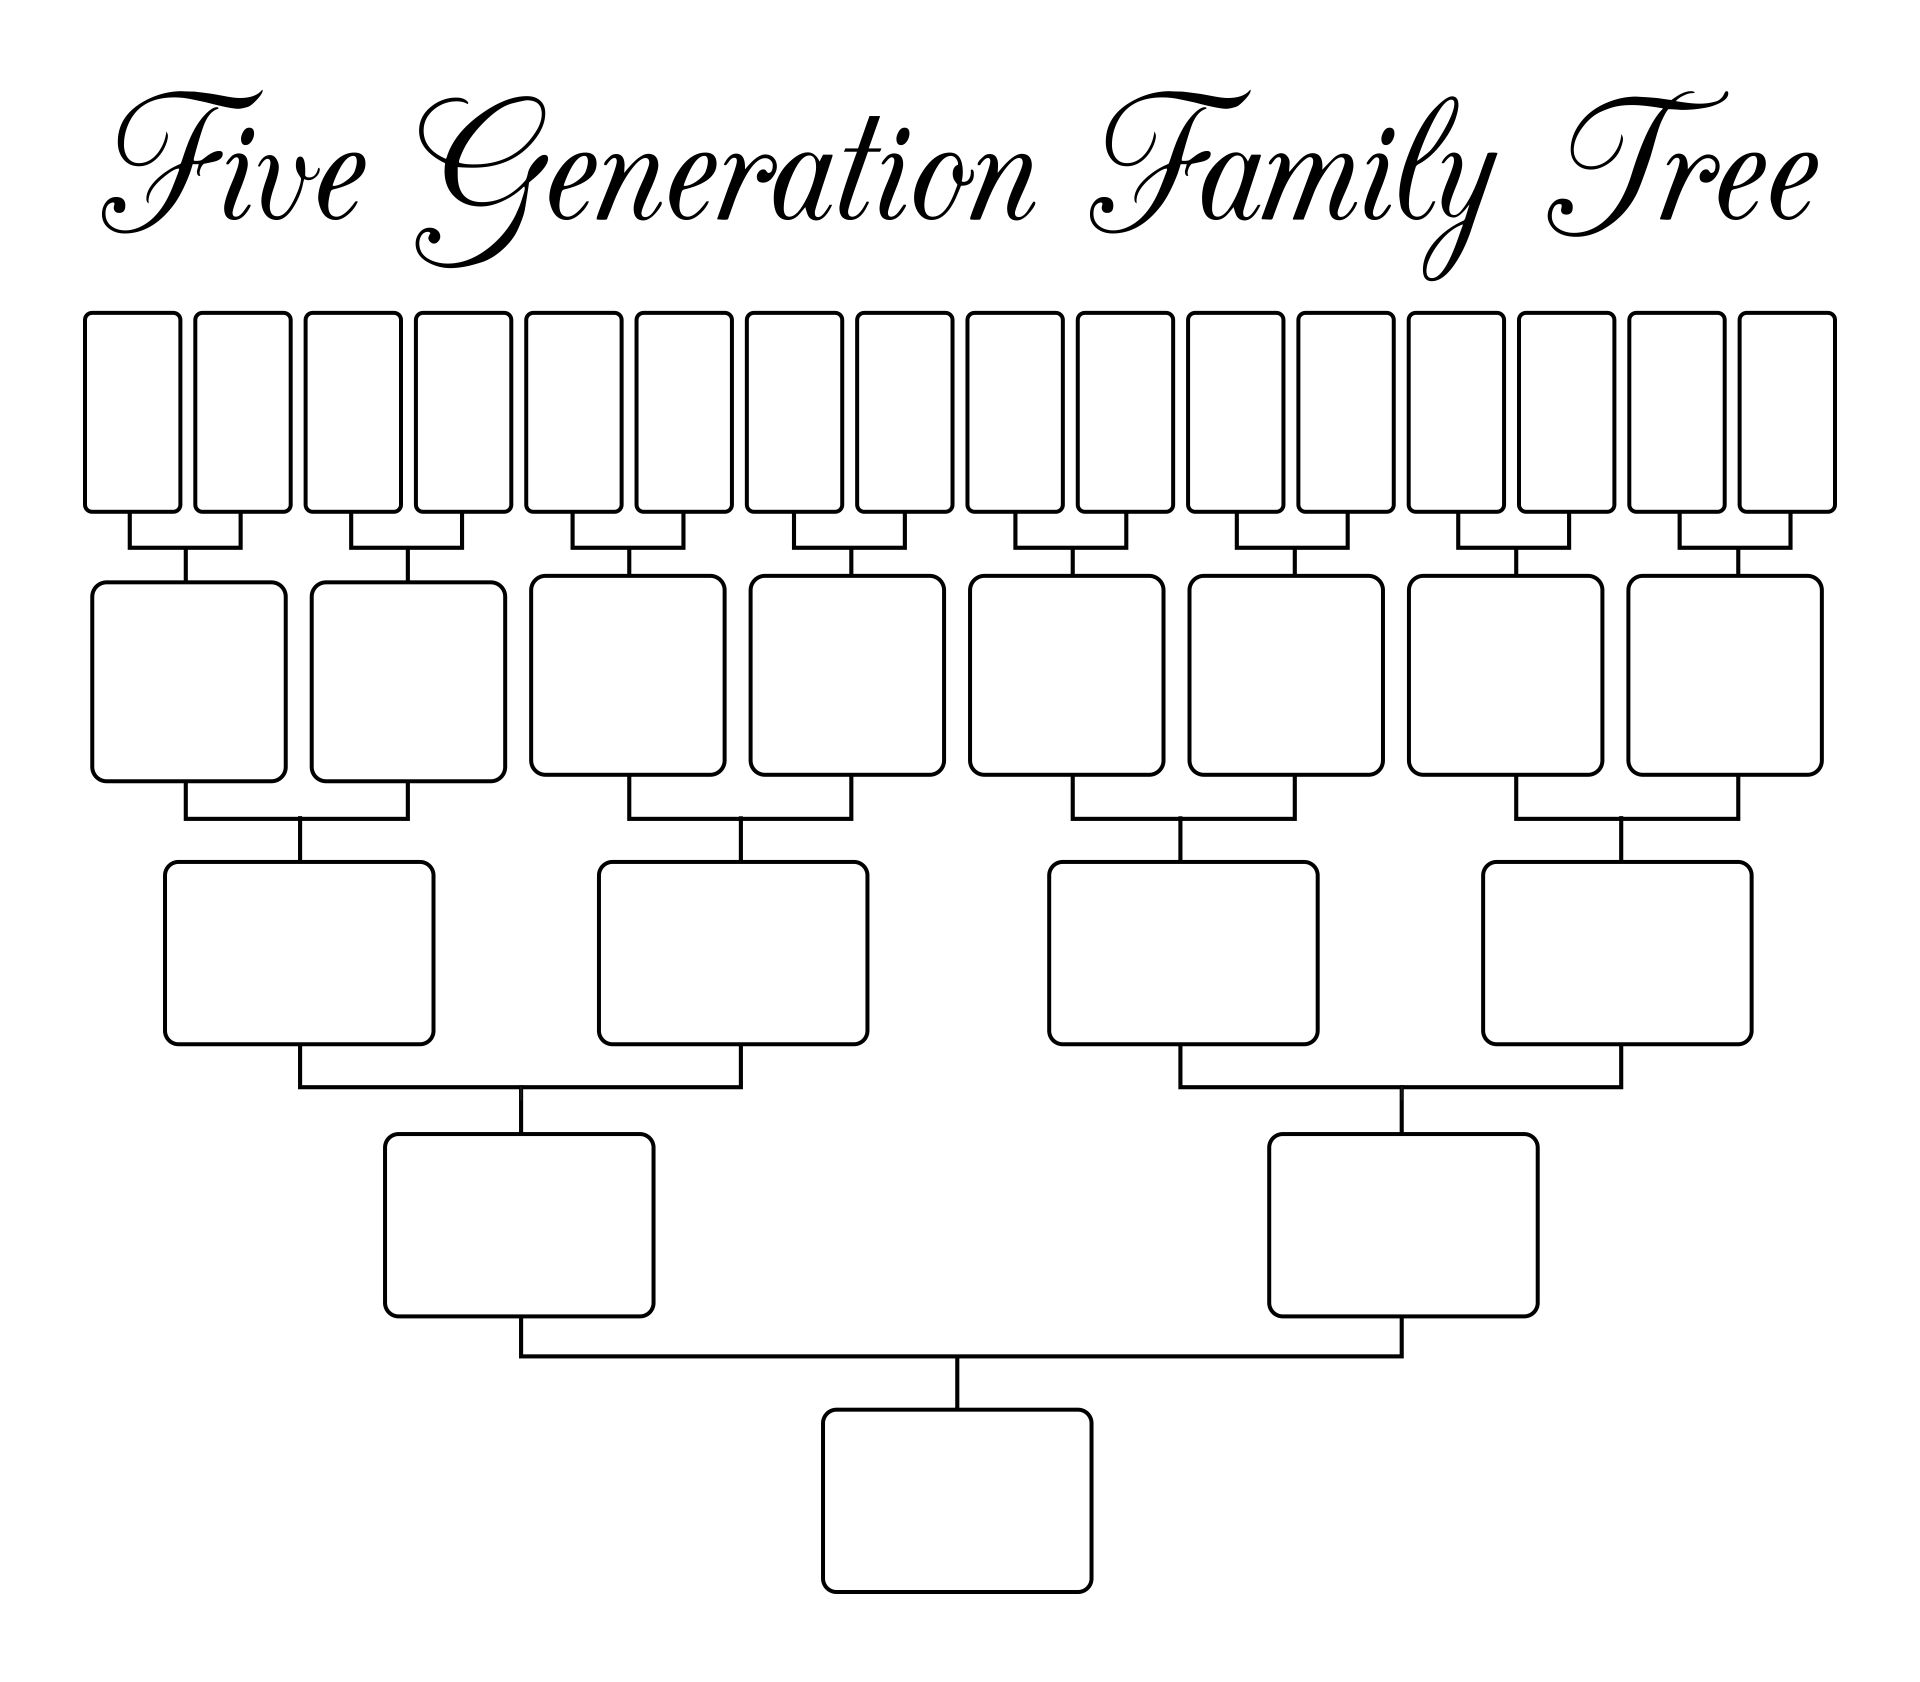 Family Tree Template 6 Generations